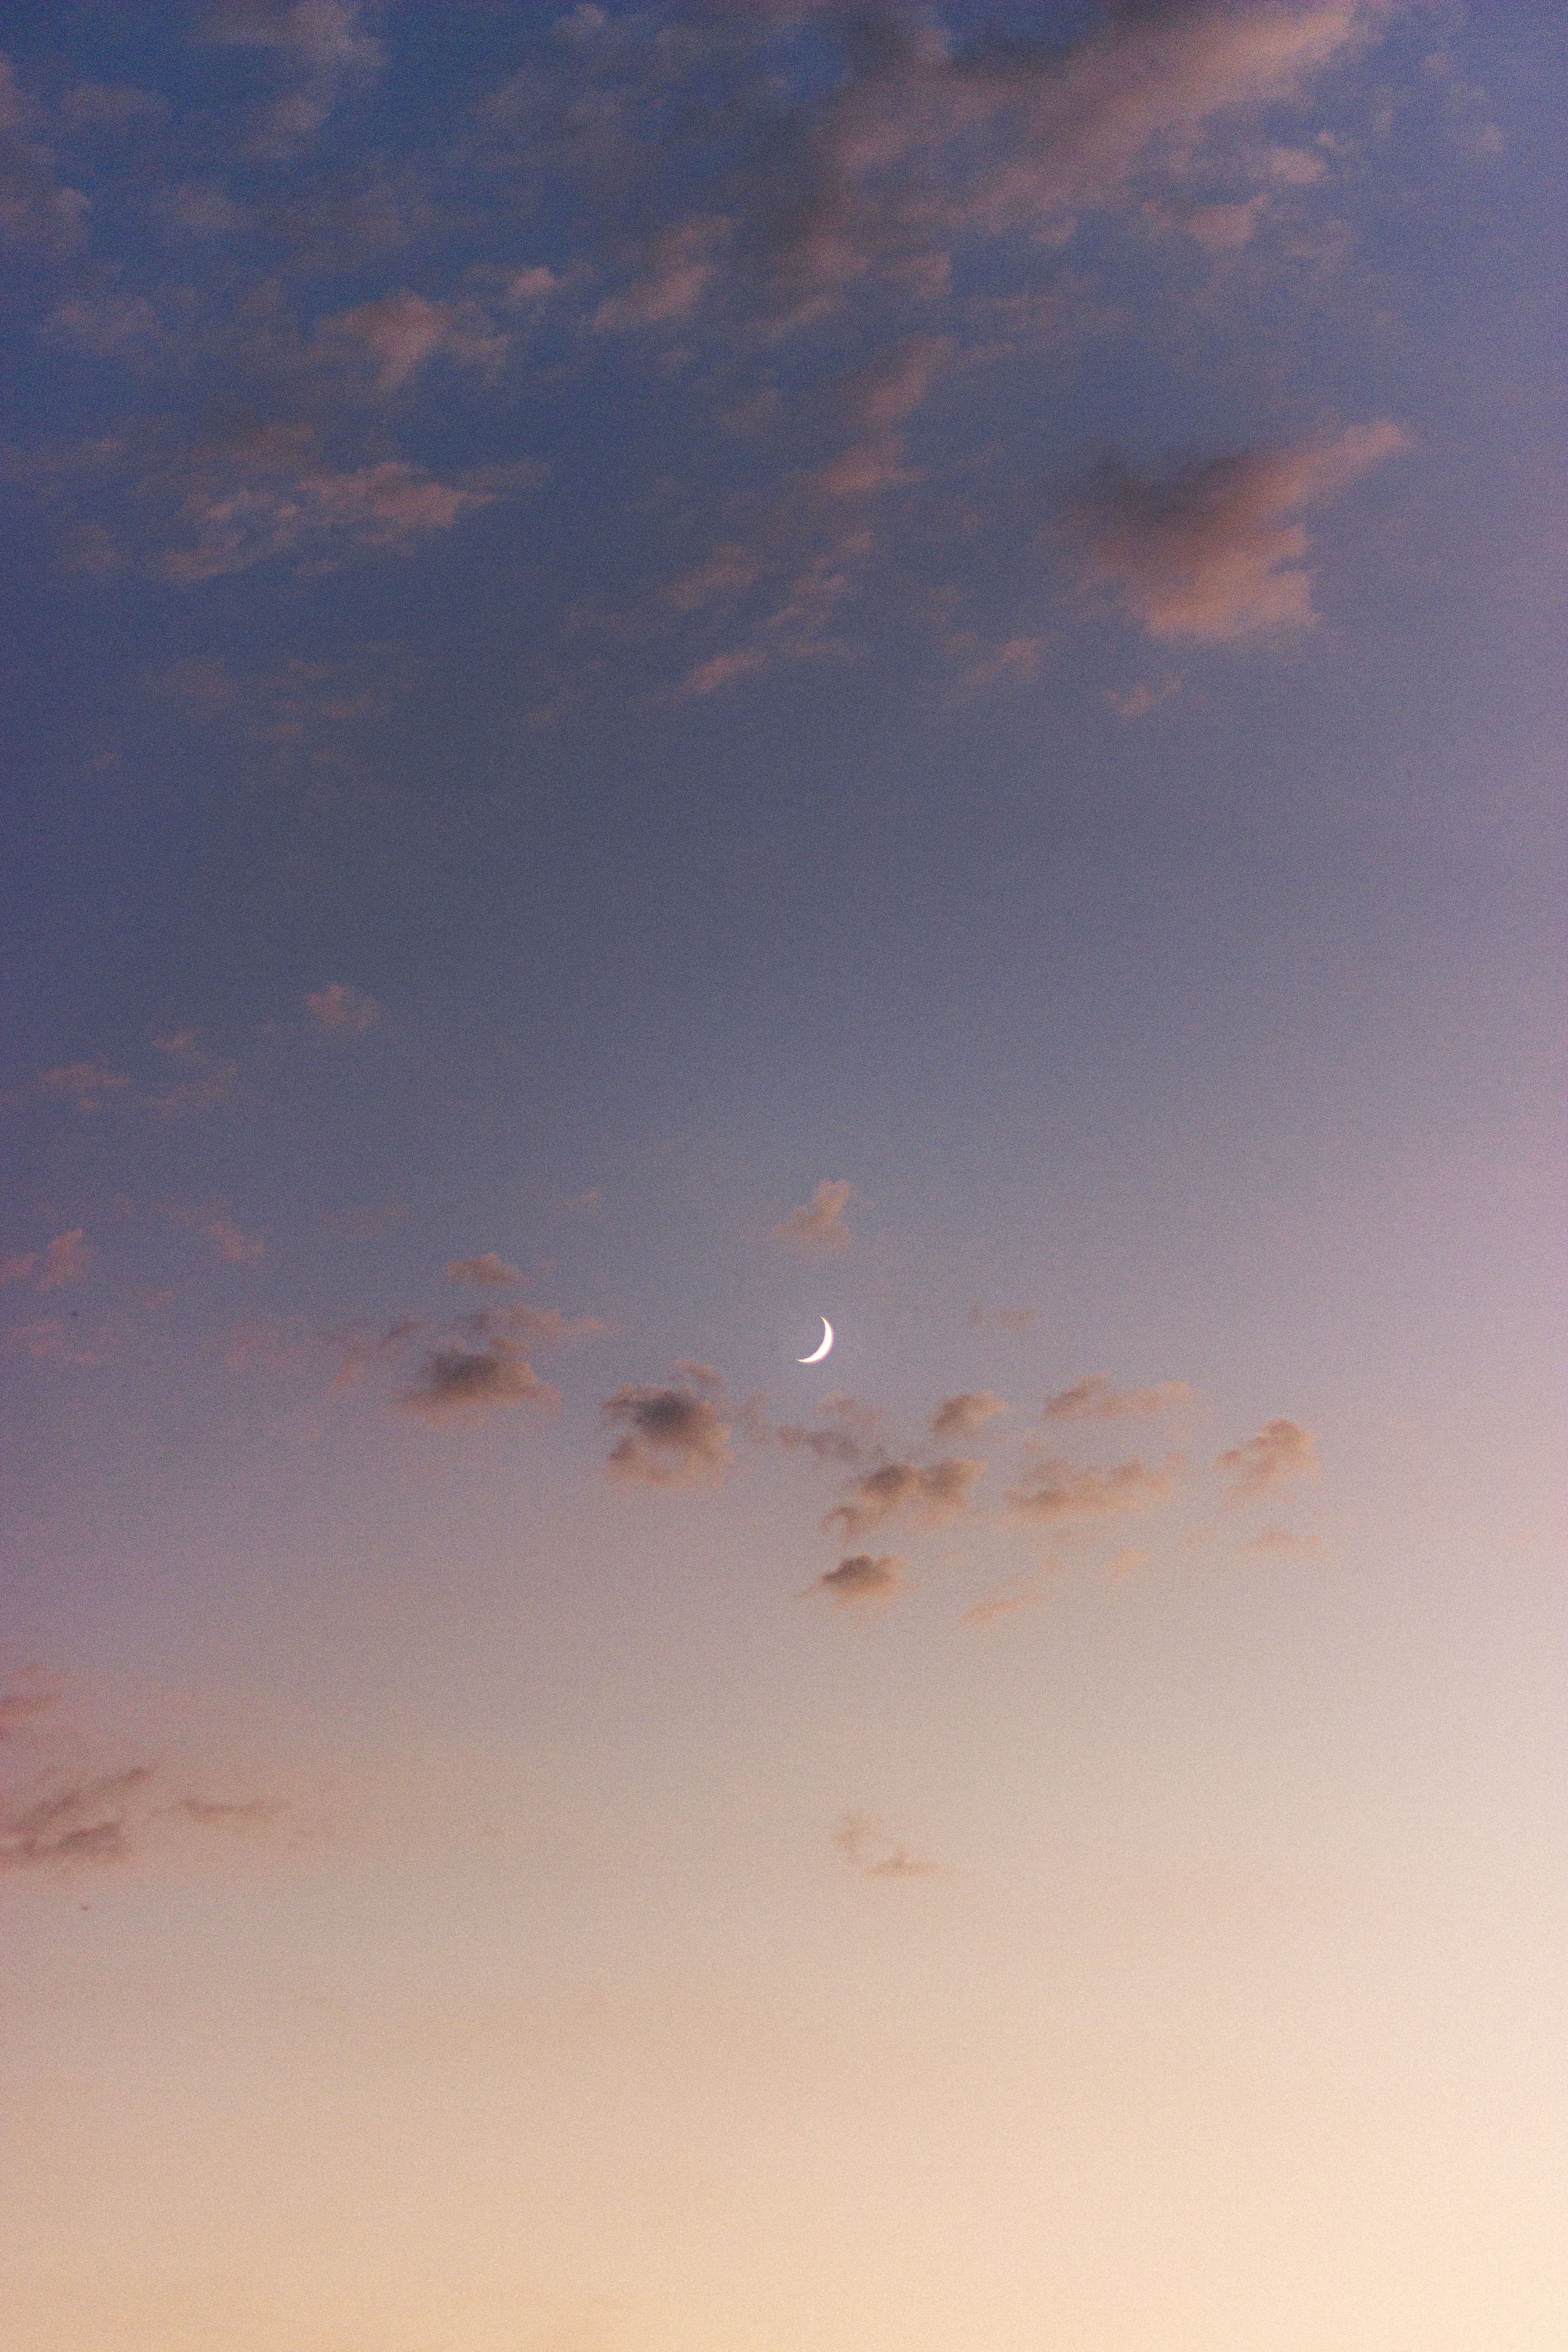 dusk, clouds, nature, sky, twilight, moon High Definition image